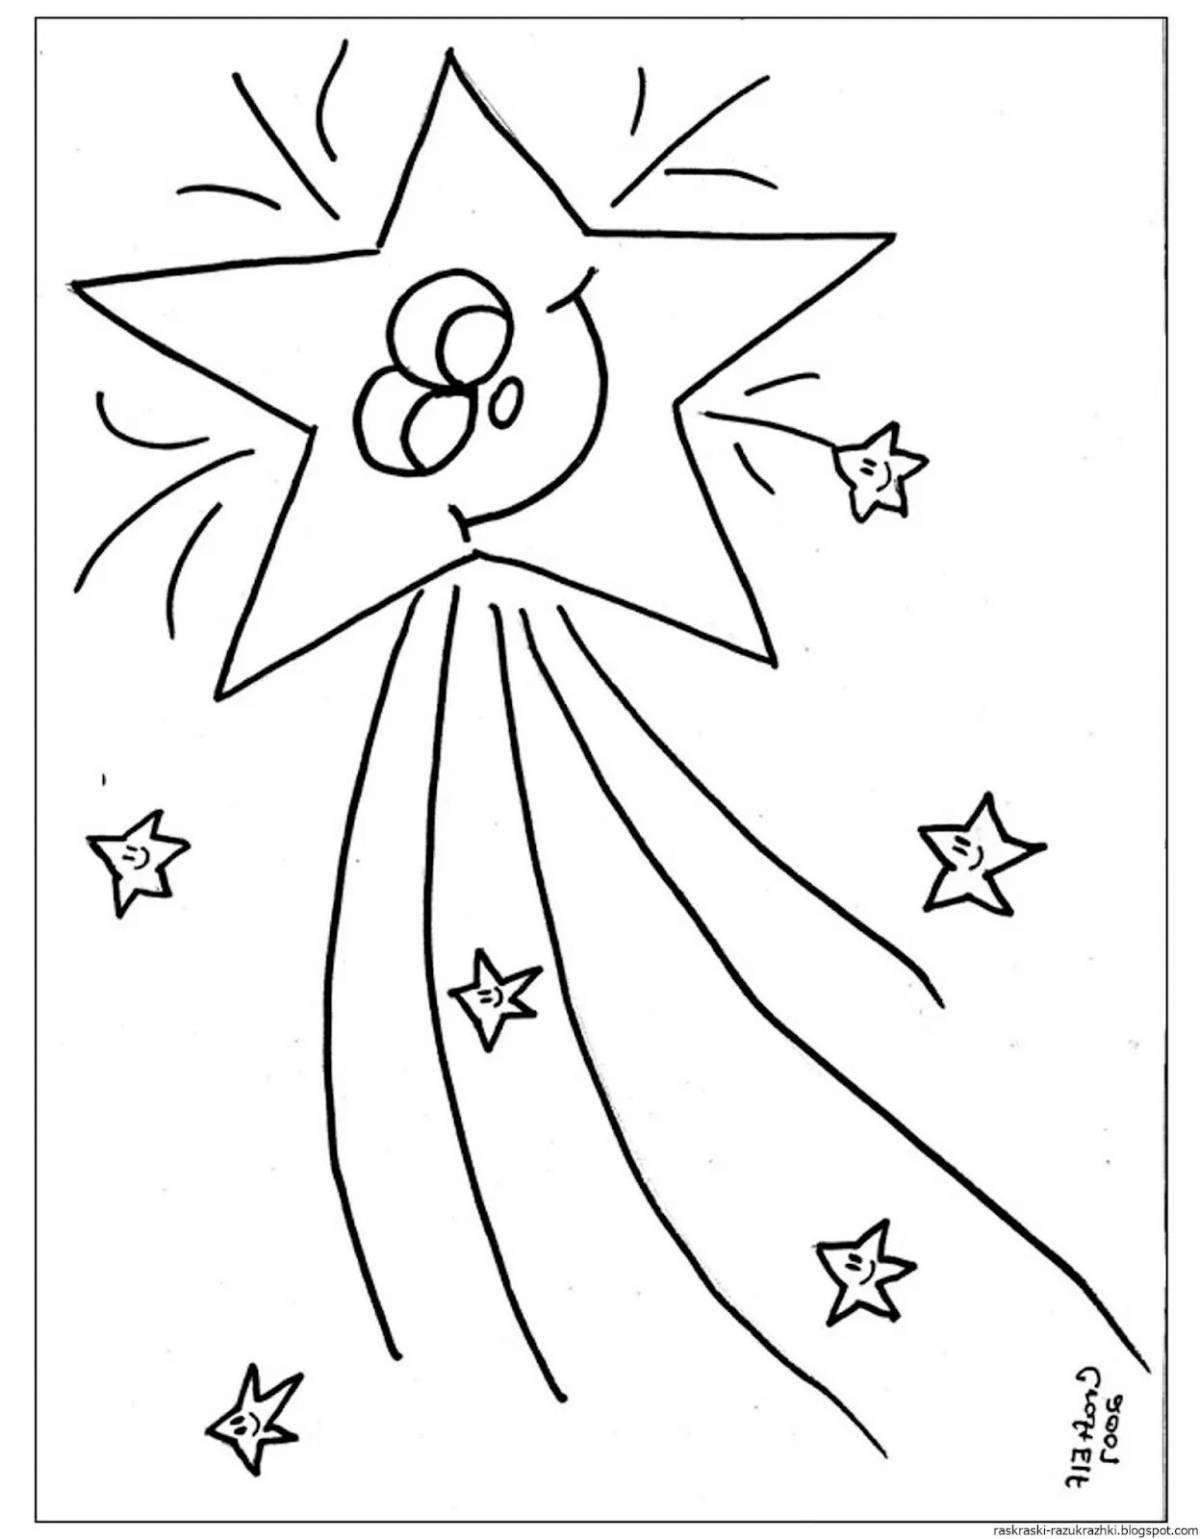 Merry christmas star coloring book for kids